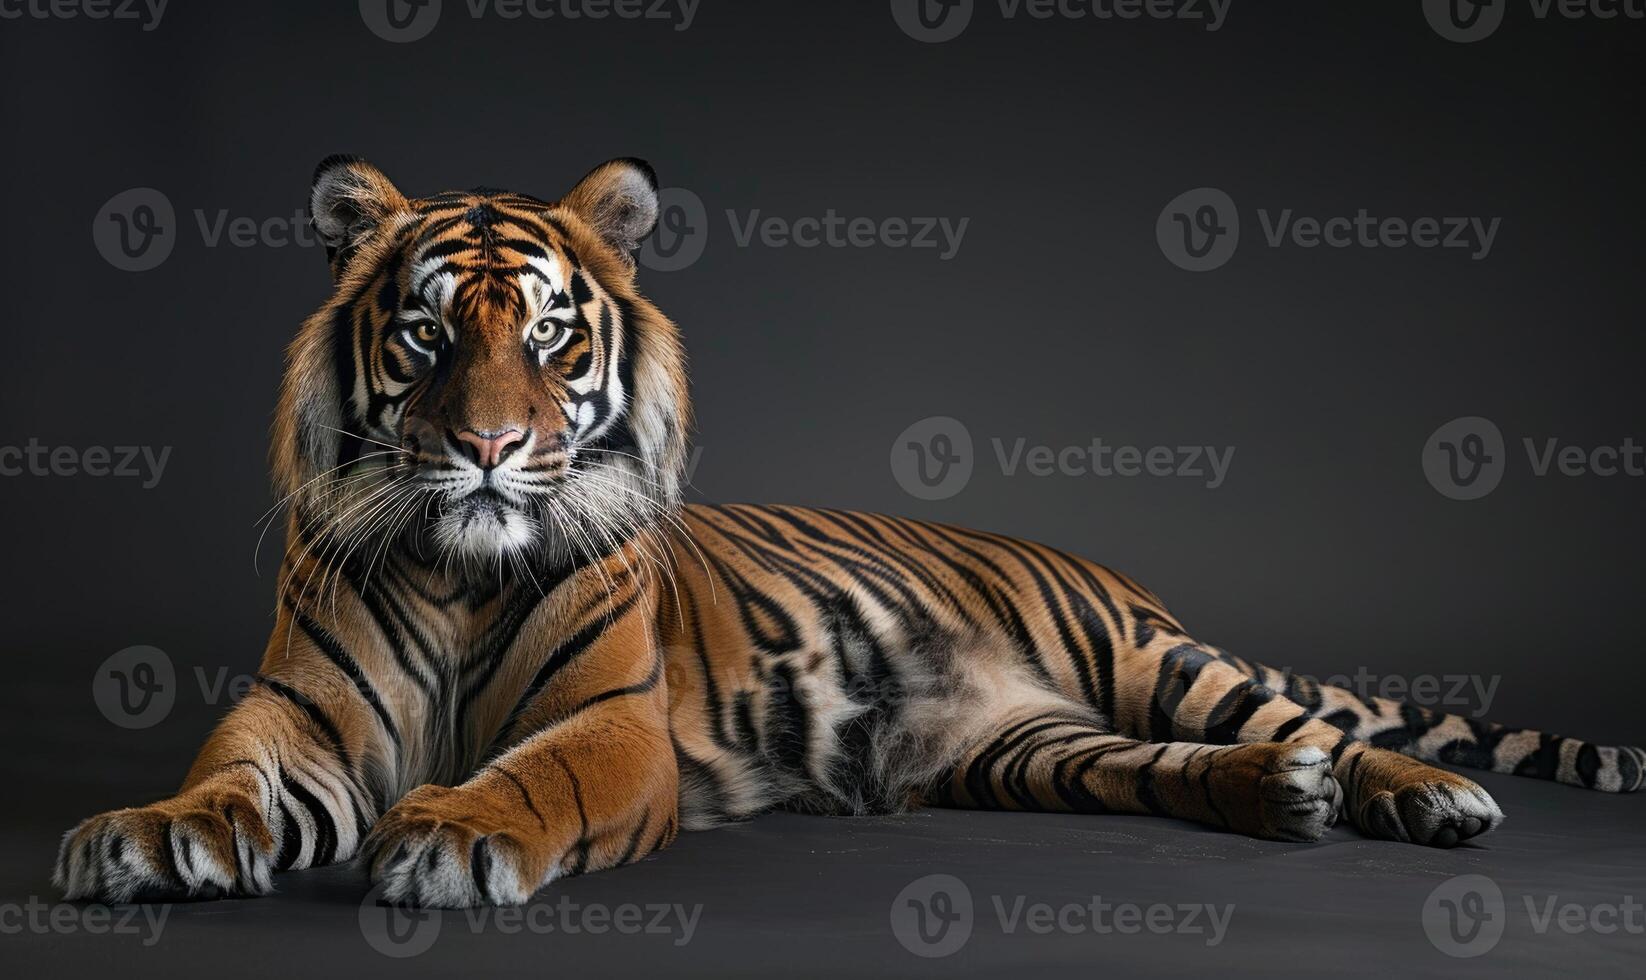 A Sumatran tiger lounging in a relaxed pose against a studio backdrop photo